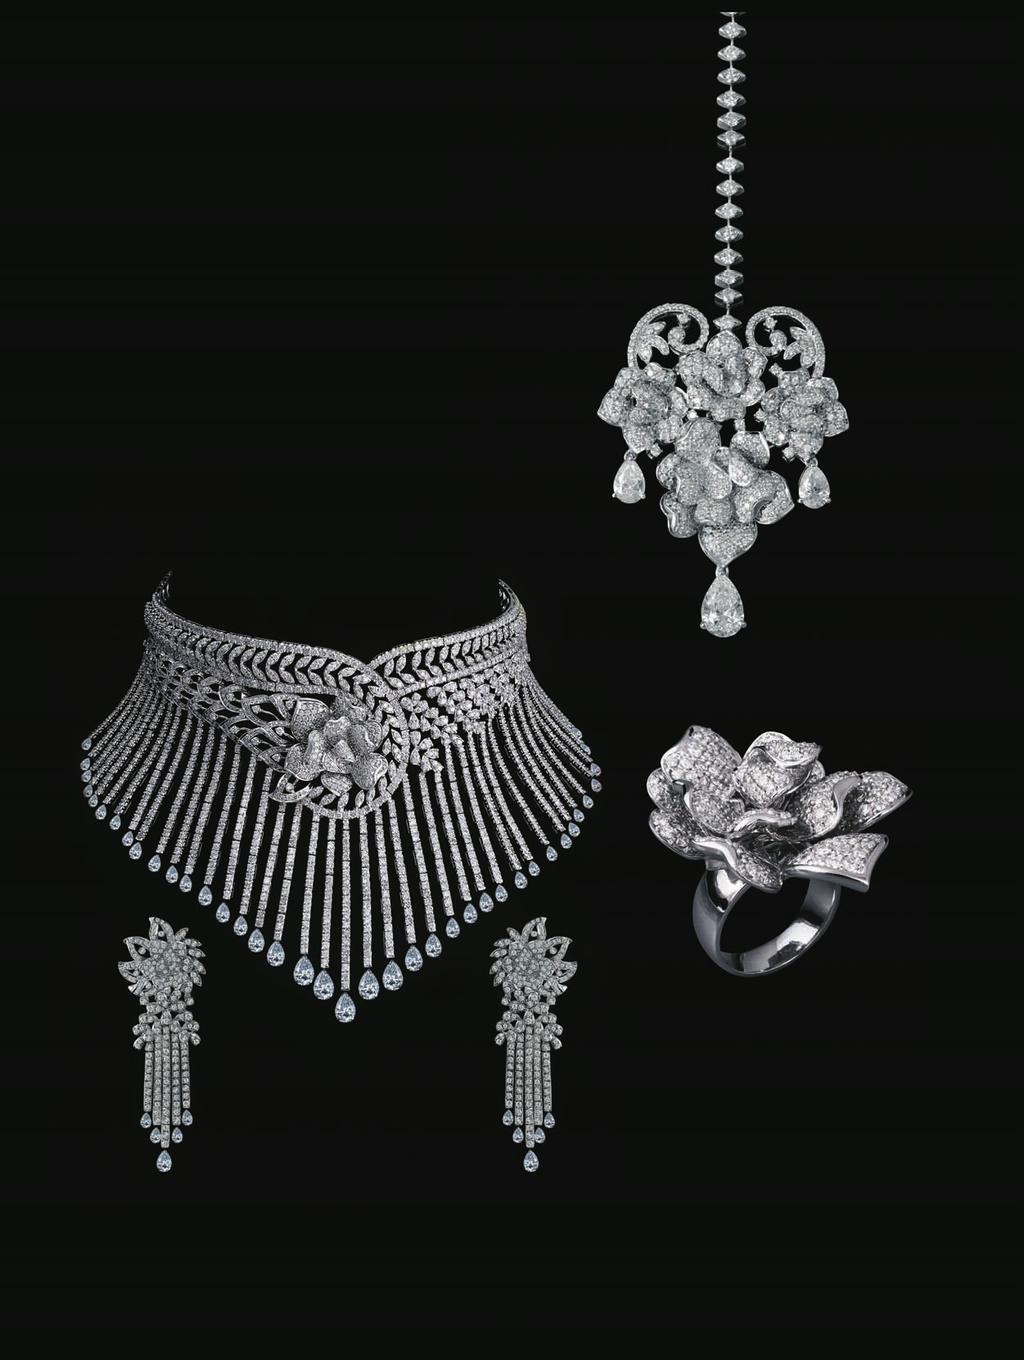 Bouquet of Bridal Jewels eres introduces The Bridal Brouhaha collection conceptualized and designed by Nitin Goenka, whose Cvision of a wedding extends beyond just the wedding day.